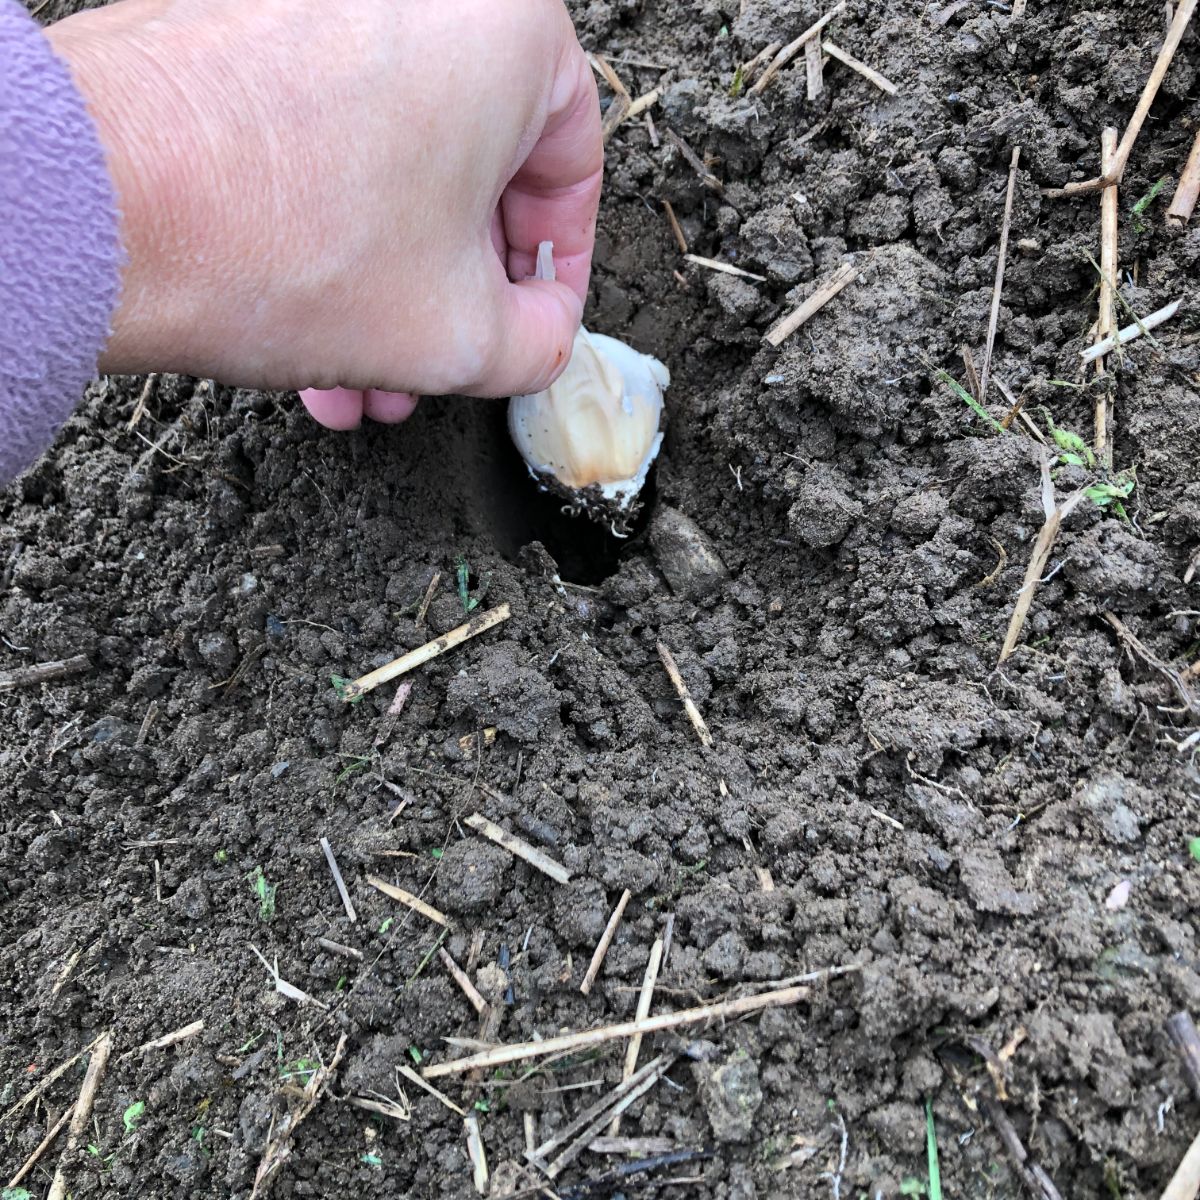 Planting a bulb top up, root down.